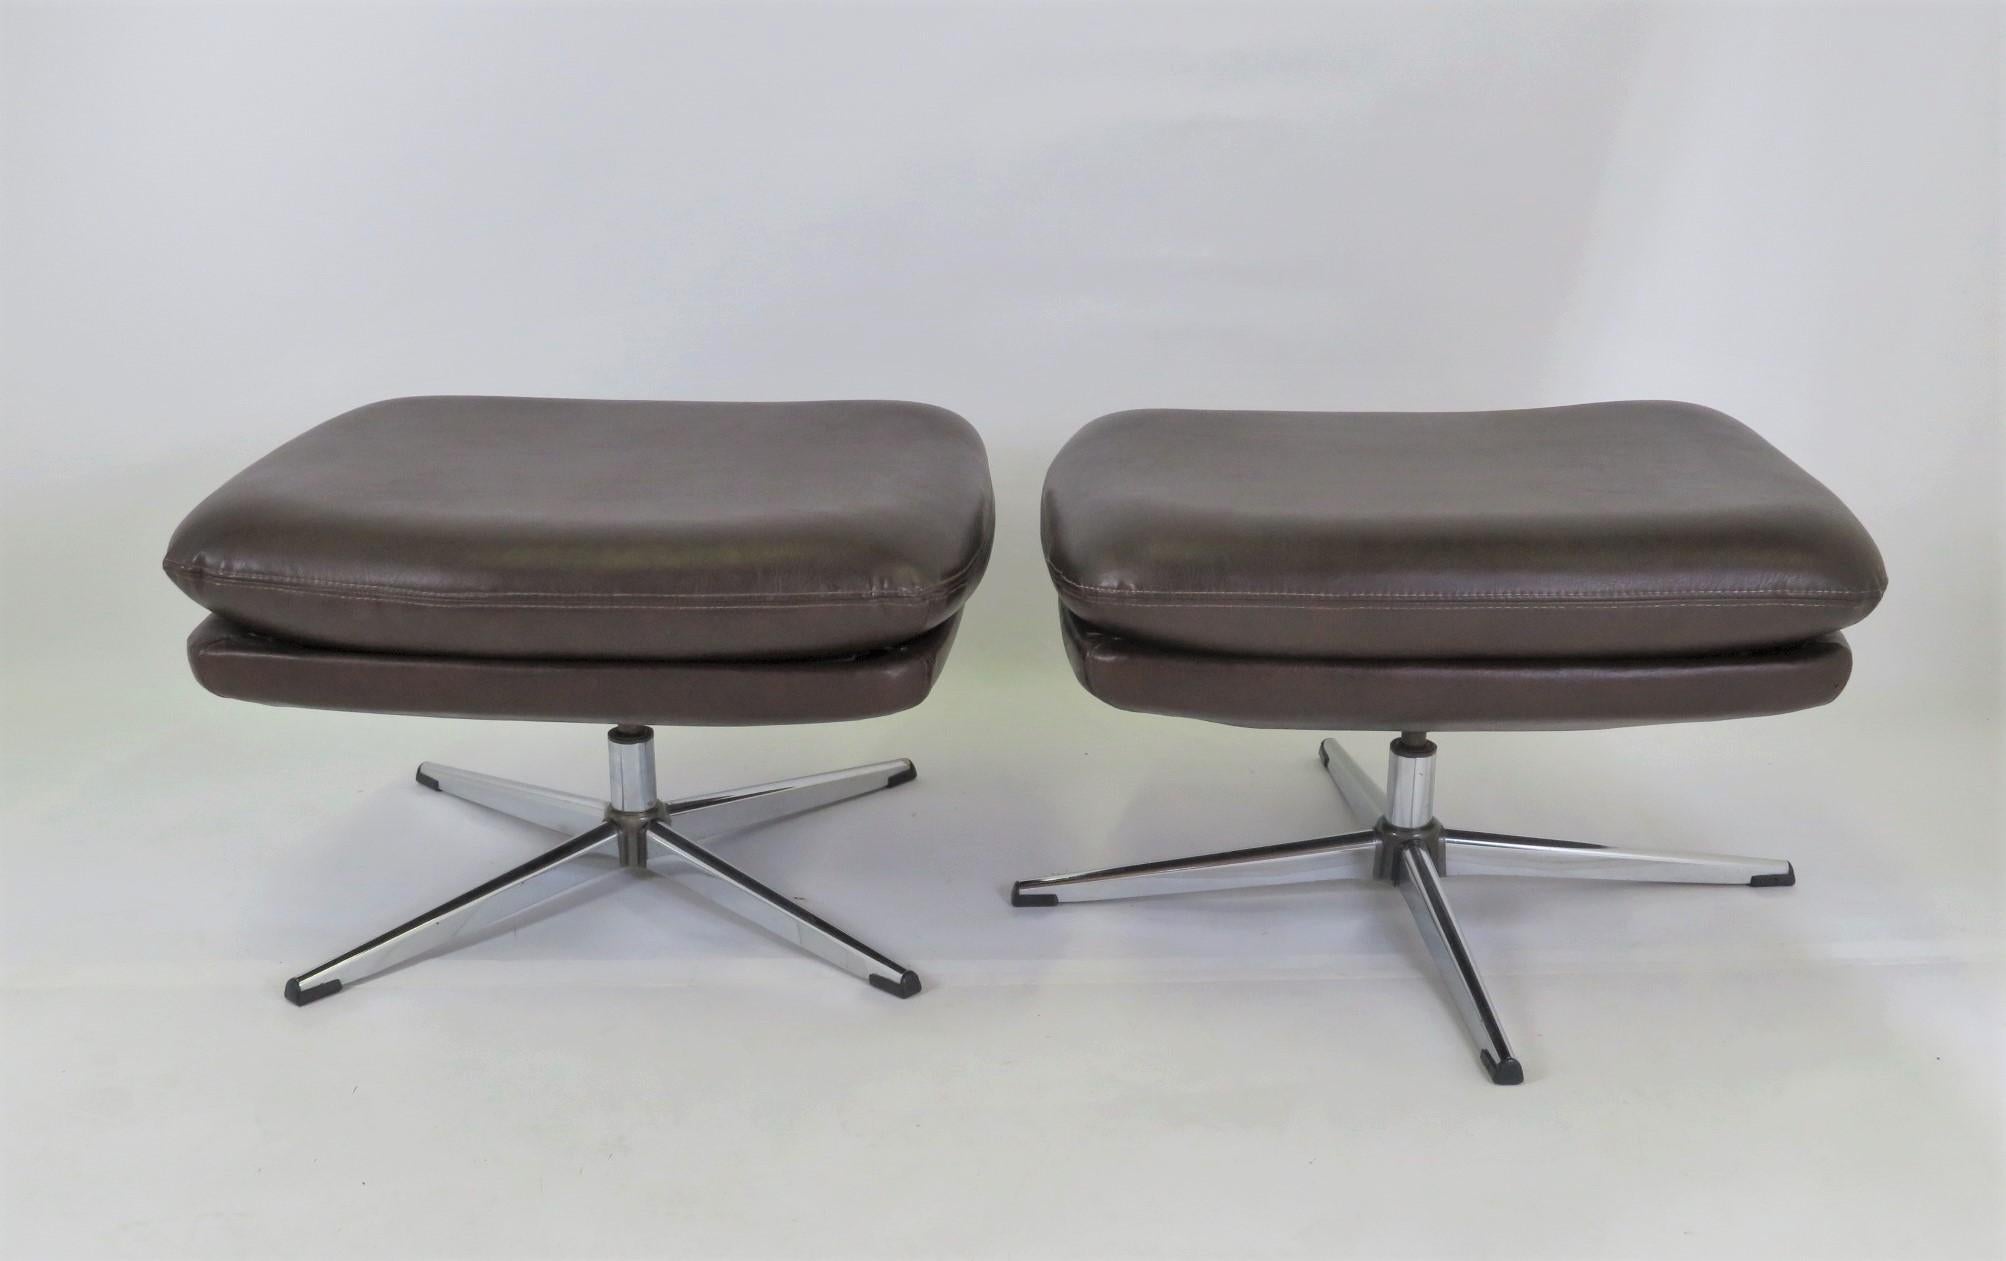 Great pair of Overman footstools benches in brown leatherette and chrome feet. These were manufactured in the 70s in Tennessee by Overman USA. They have four point star bases and swivel. Feet have their original glides. In very good